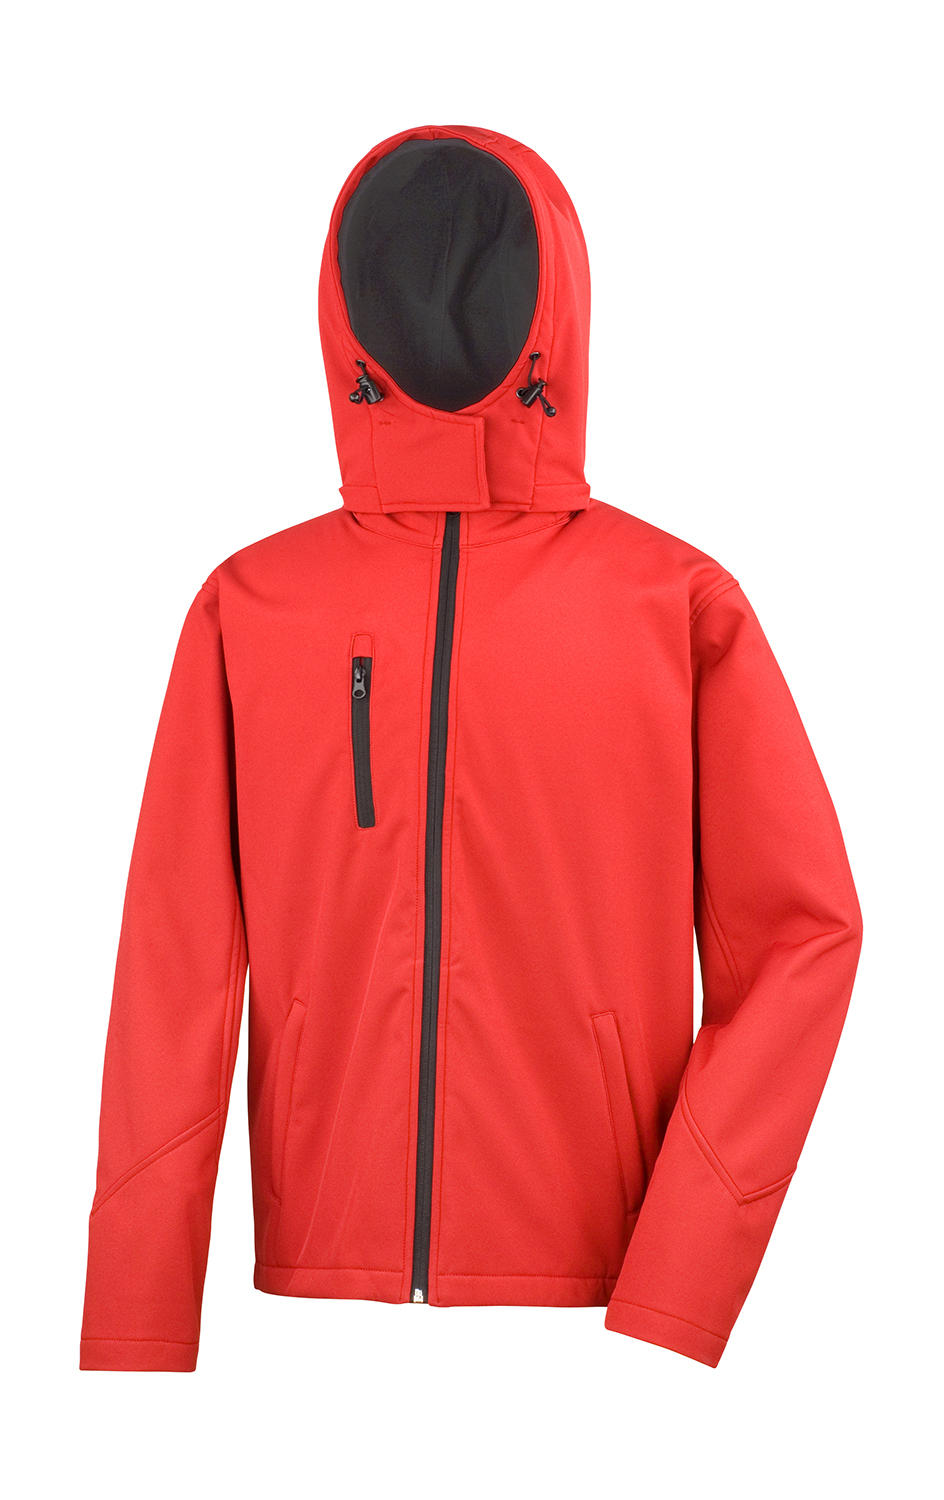  TX Performance Hooded Softshell Jacket in Farbe Red/Black